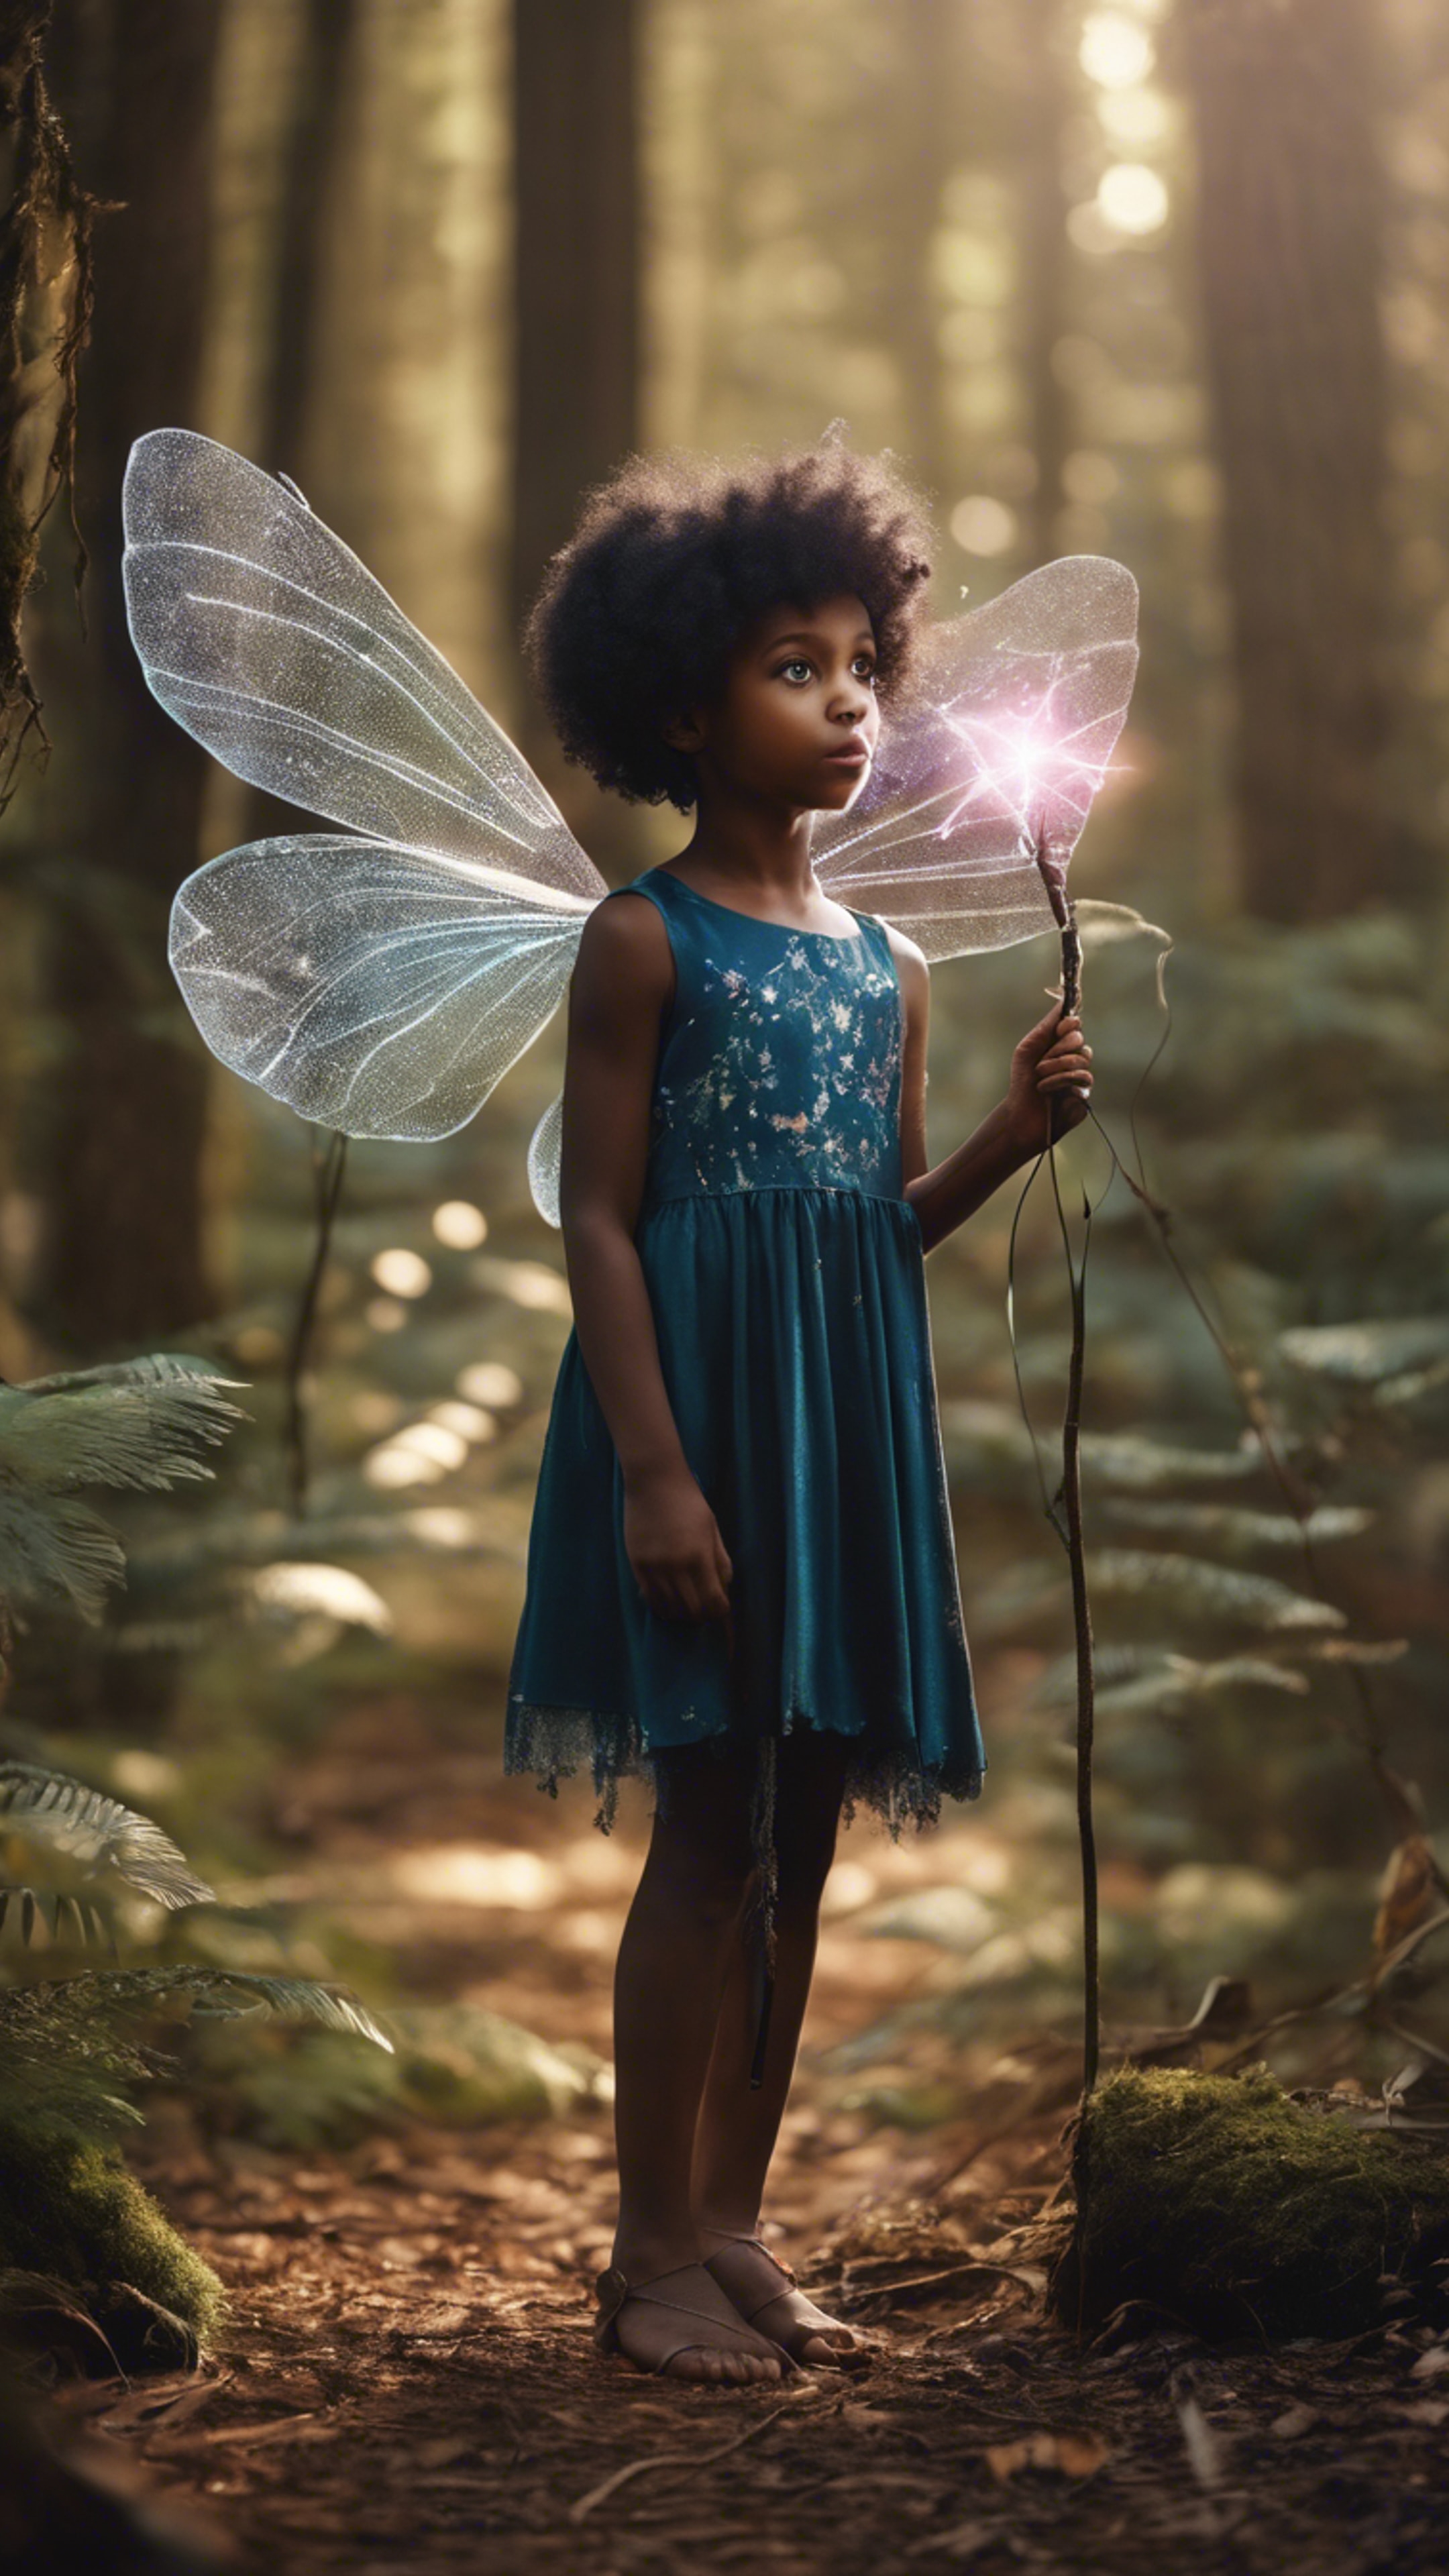 A cute image of a black girl wearing fairy wings, holding a magic wand in a mystical forest. วอลล์เปเปอร์[6c77347a4892474c928d]